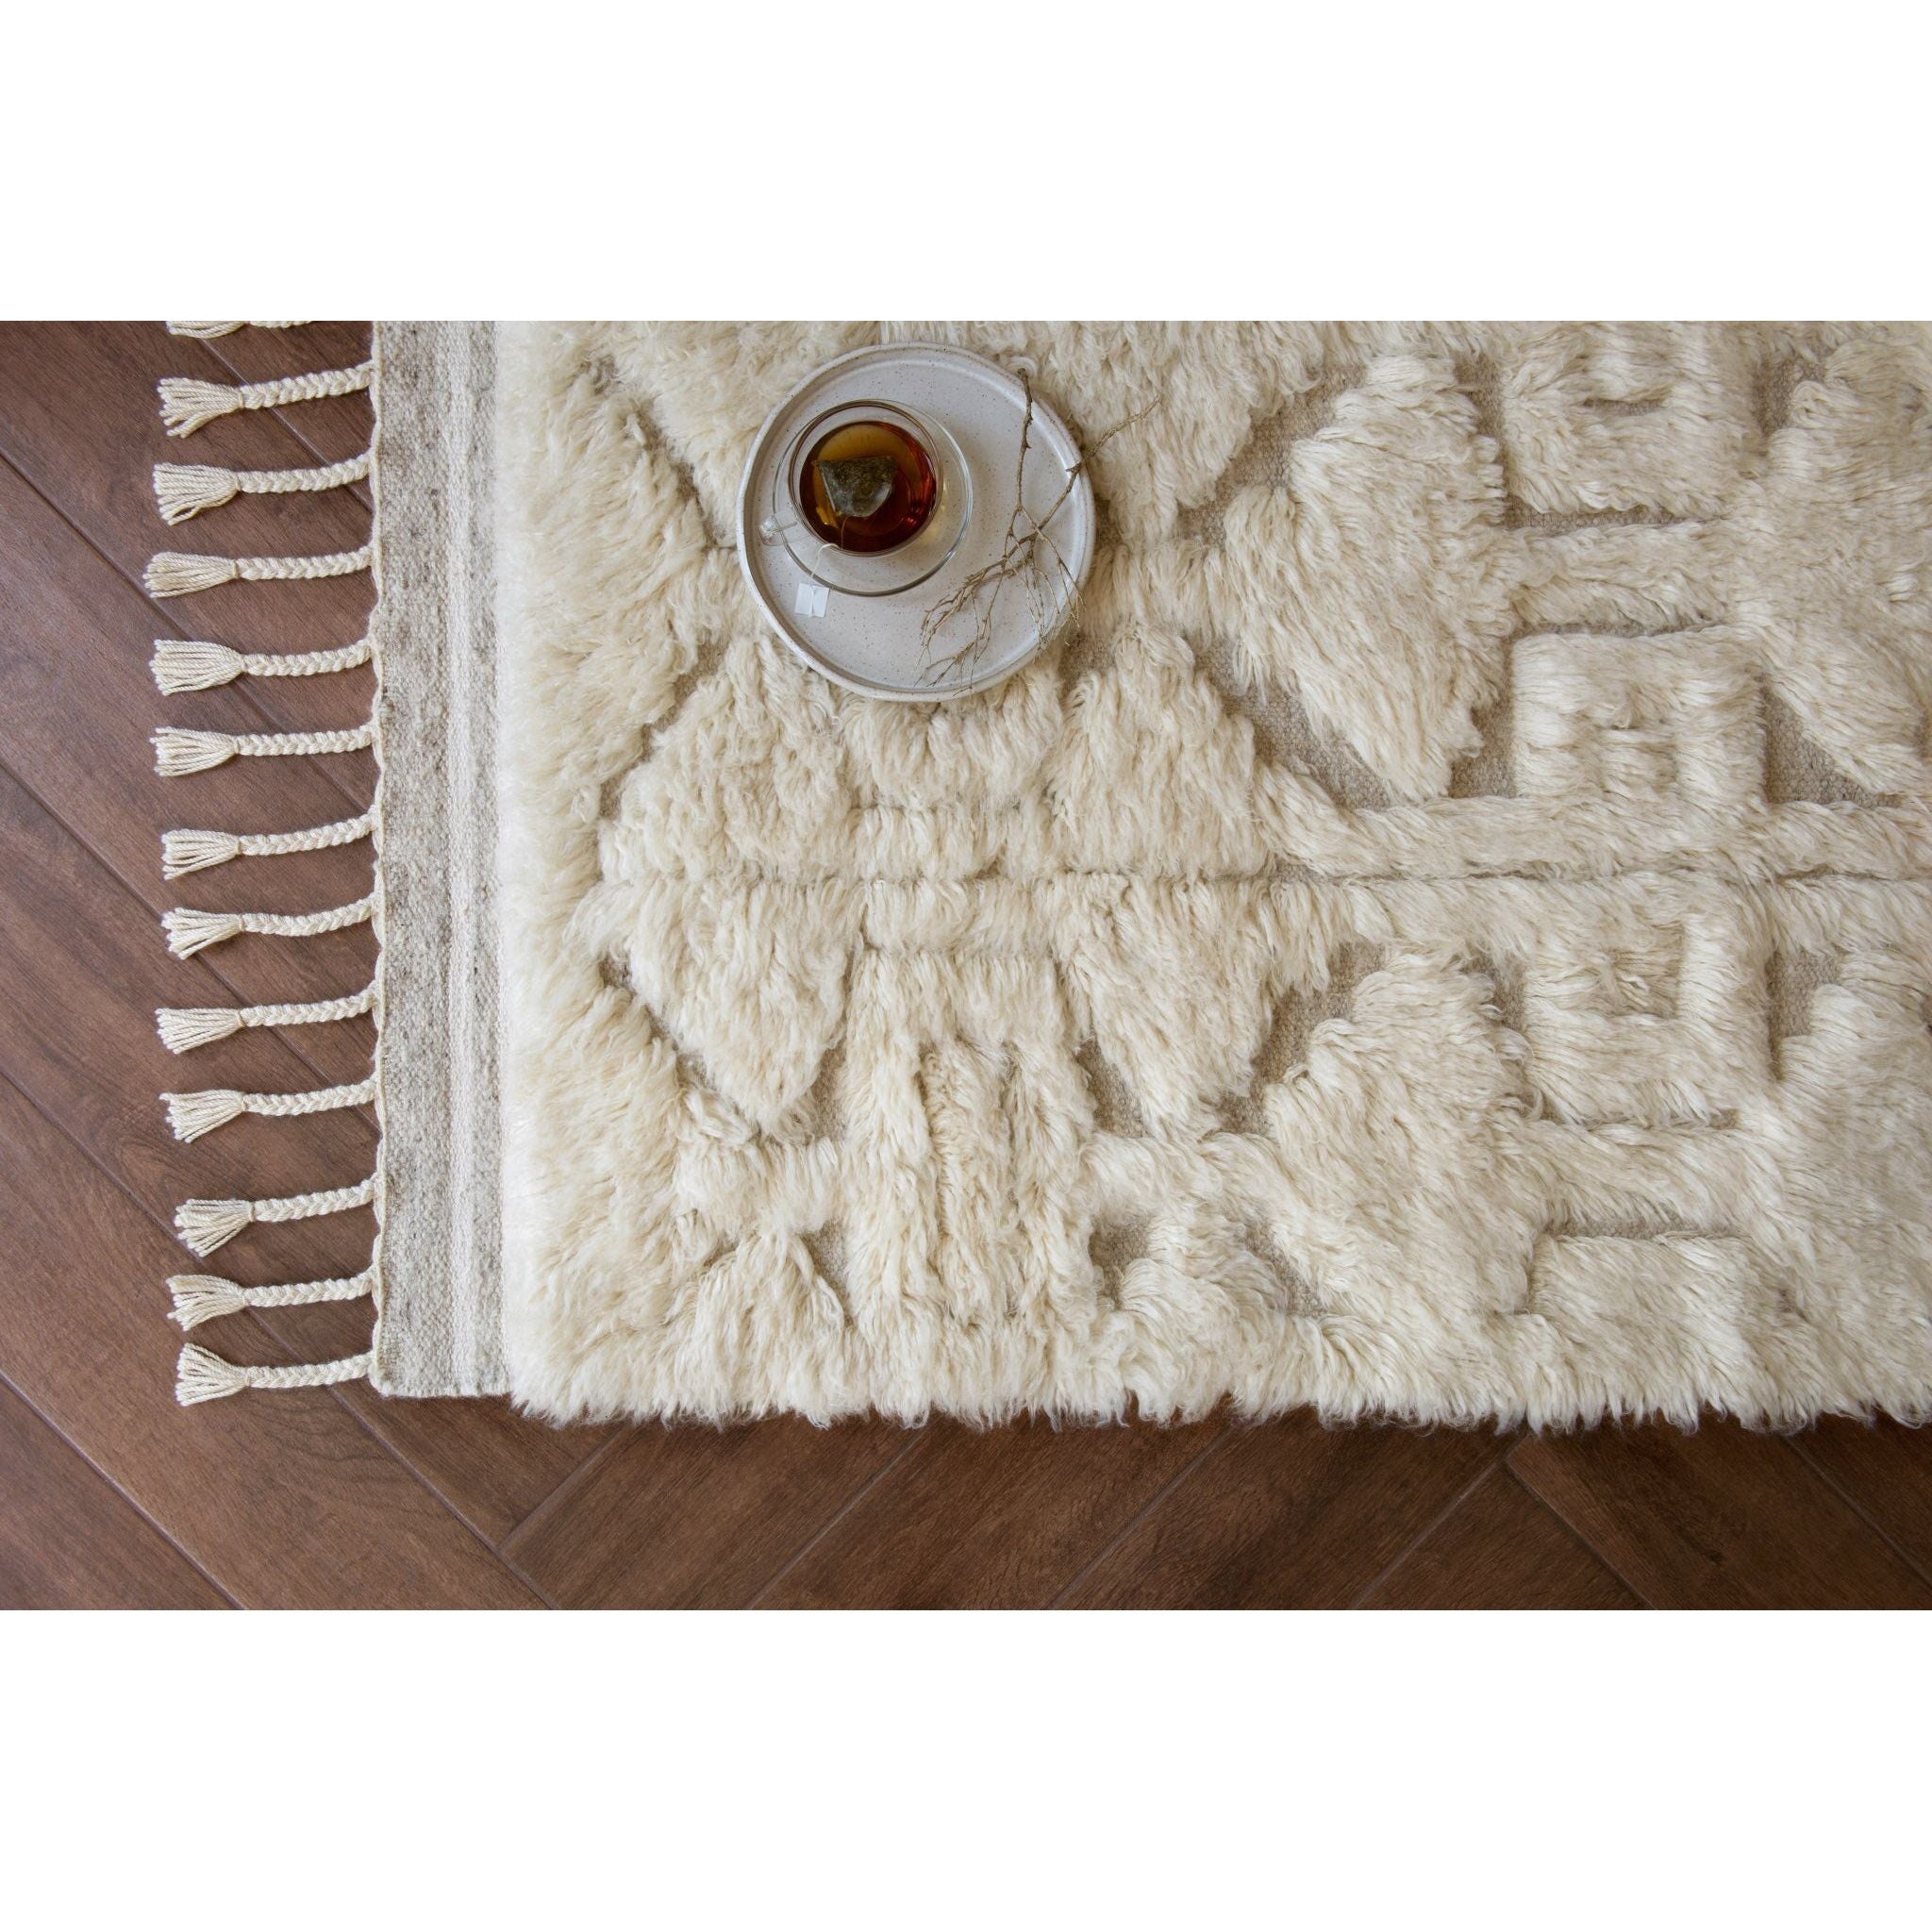 Hygge Oatmeal/Ivory Rug - Amethyst Home Inspired by Scandinavian textile motifs, the Hygge Collection combines a soft shaggy texture with an enduring neutral palette. Each piece is hand-loomed in India of 100% wool, ensuring long-wearing durability in even the busiest of rooms.